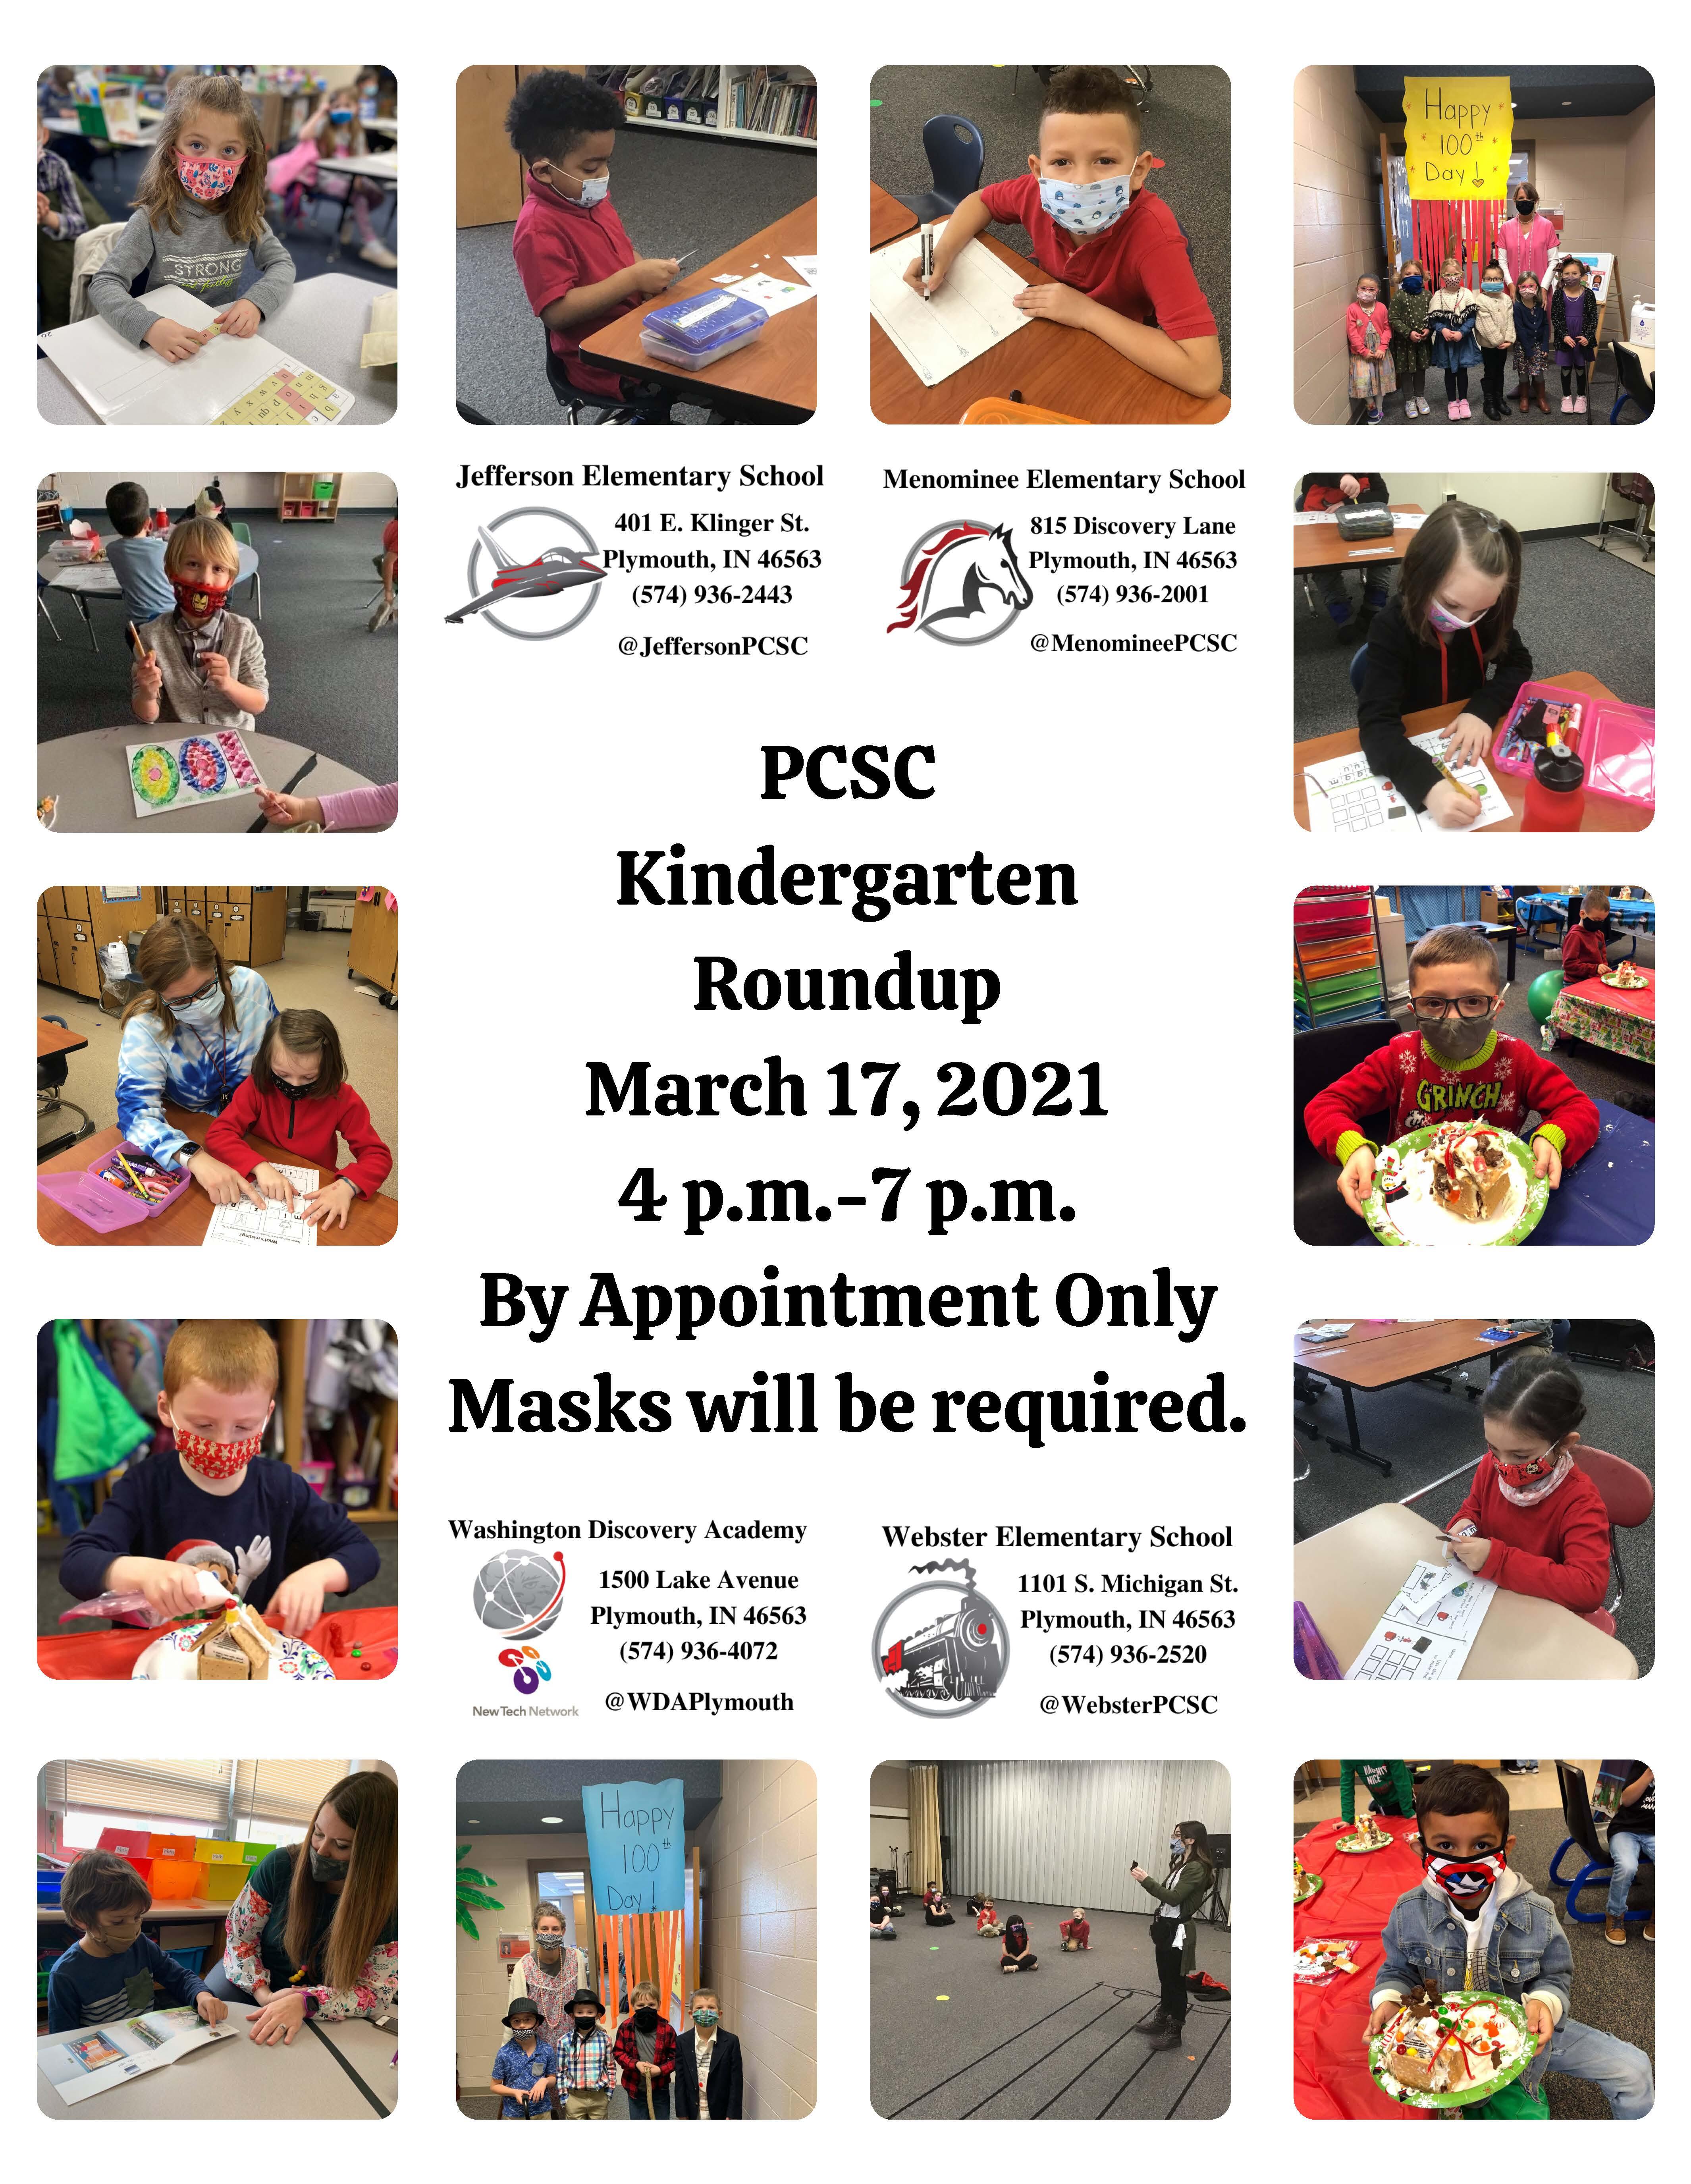 PCSC Kindergarten Roundup-March 17, 2021-4 p.m.-7 p.m.-By Appointment Only-Masks will be required. with photos and elementary school logos